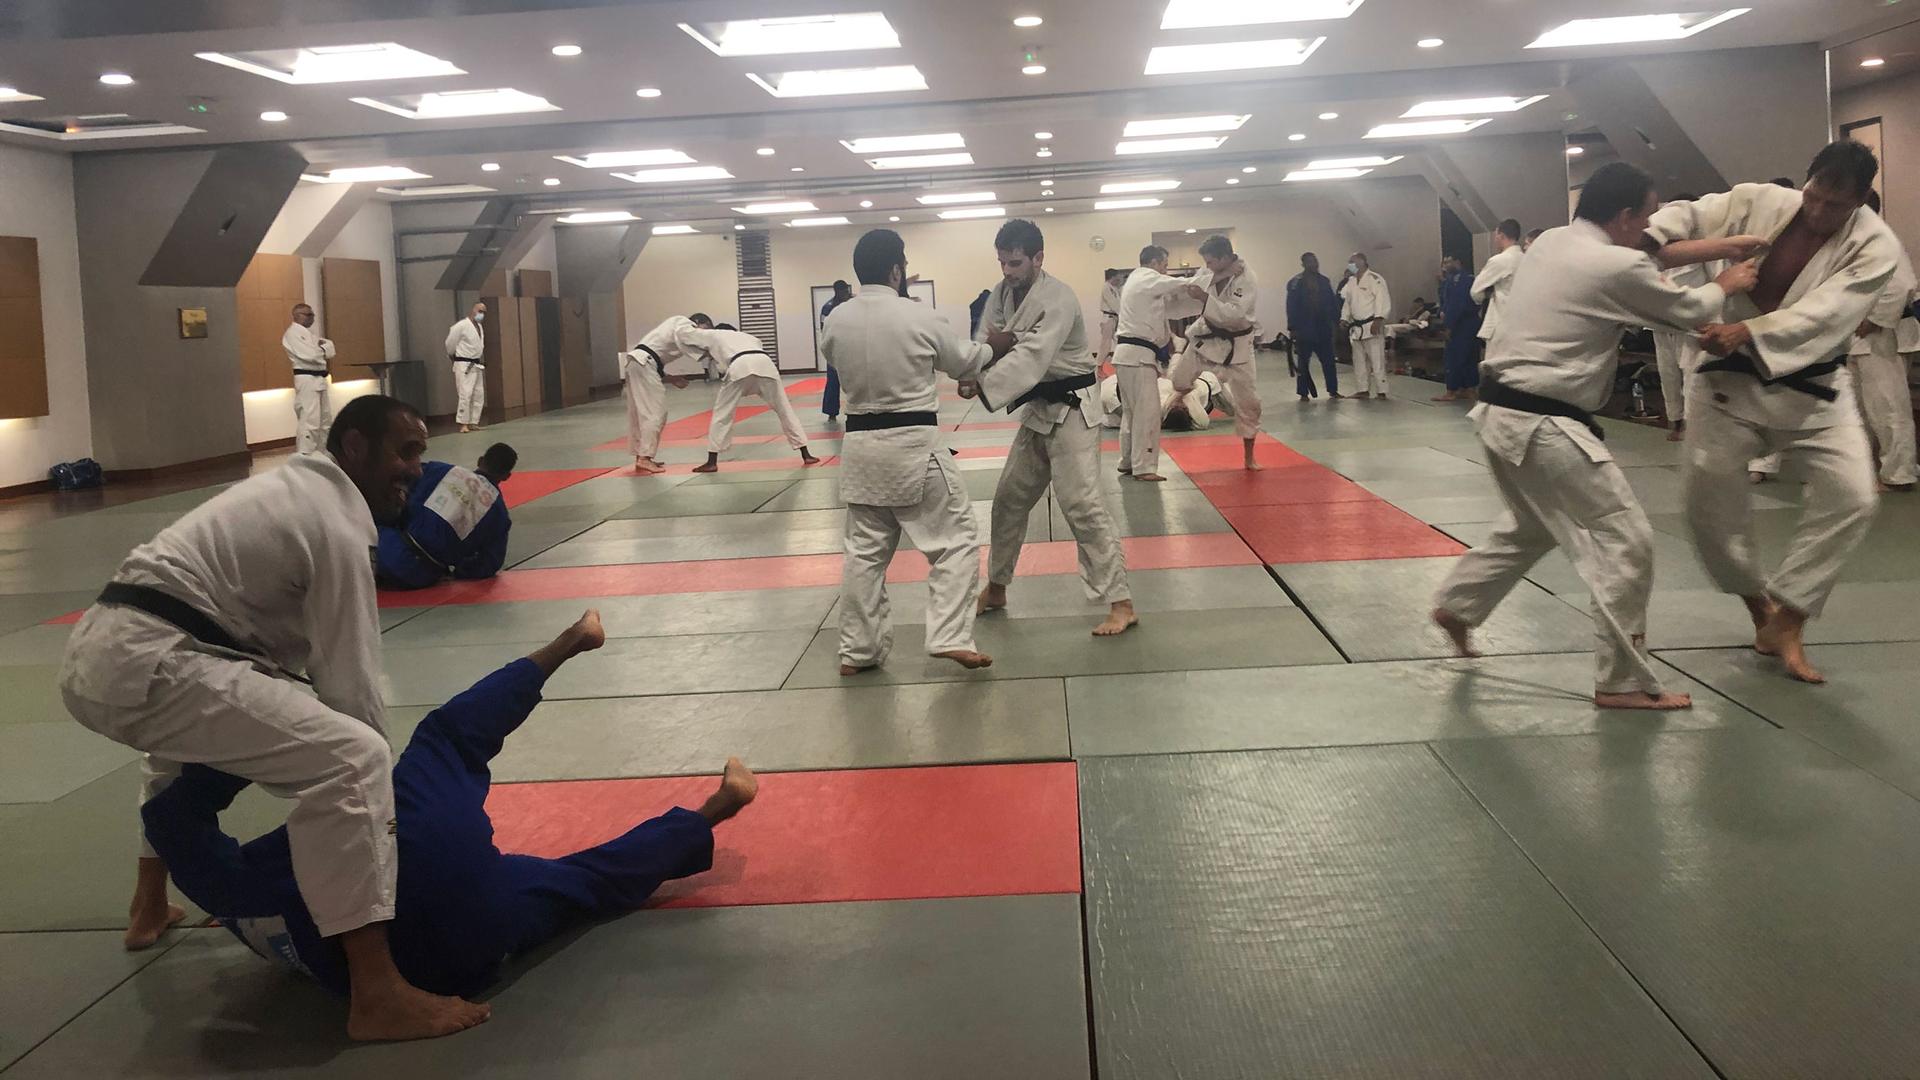 A group of 40 men of all ages wear a mix of white and blue judogis — the traditional judo uniform. Most are black belts.